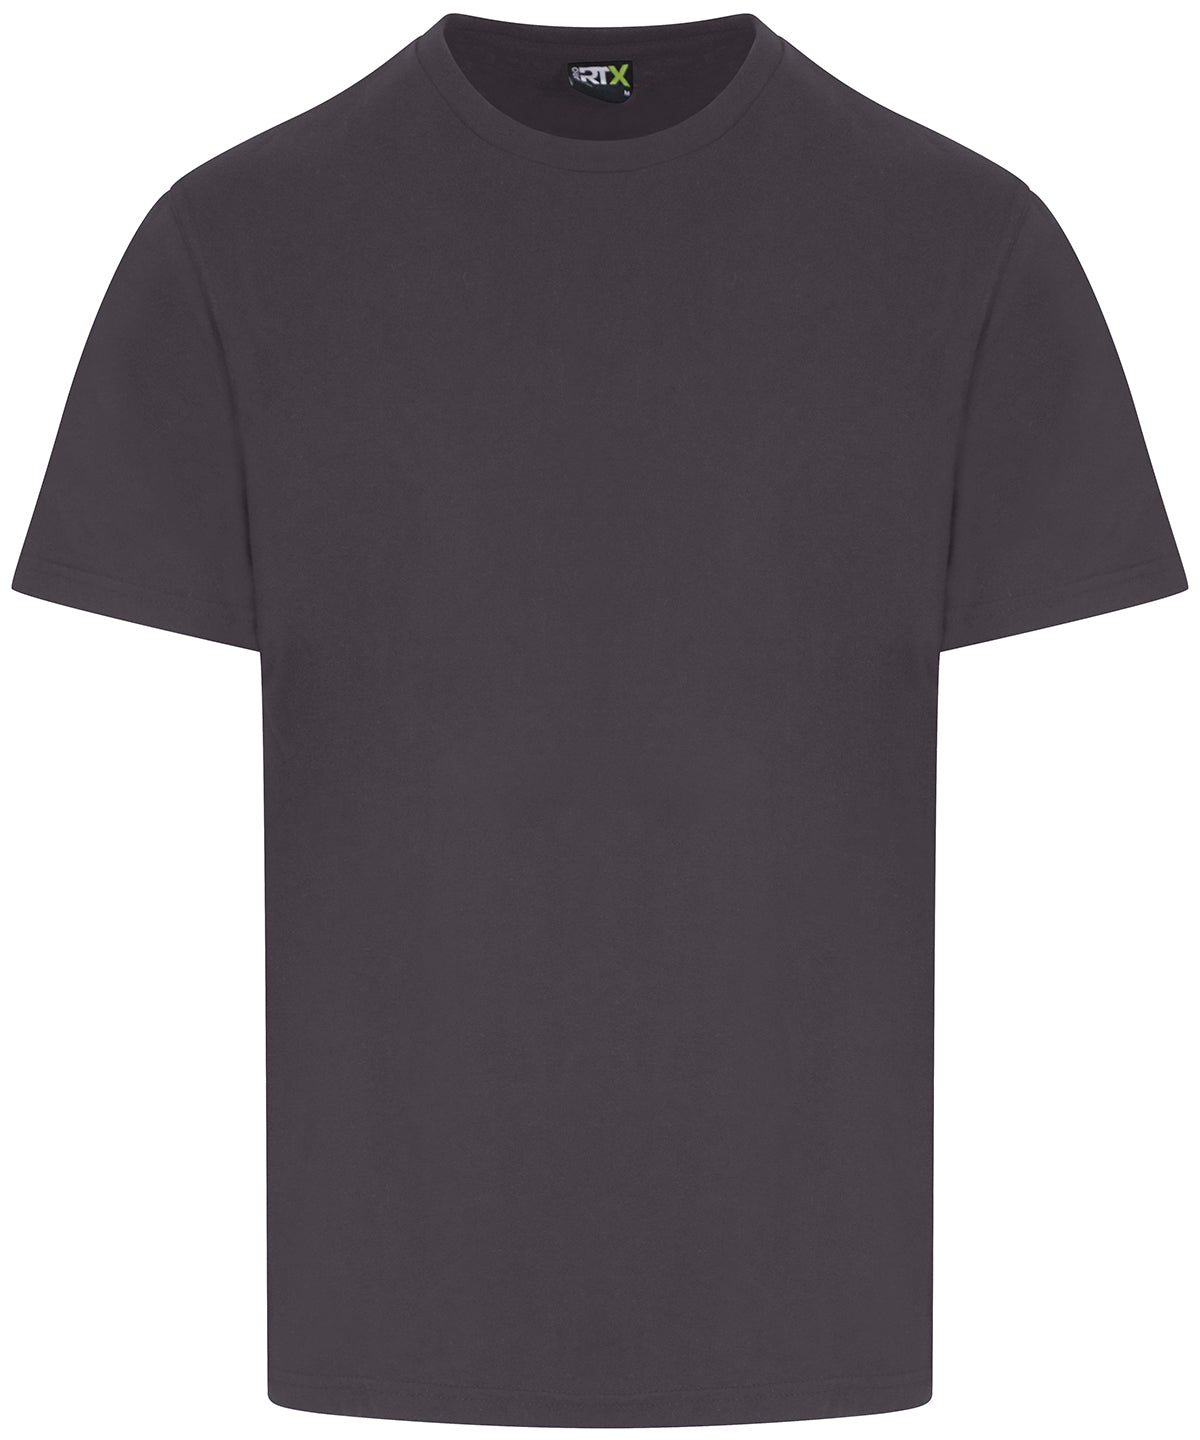 ProRTX Pro t-shirt Solid Grey